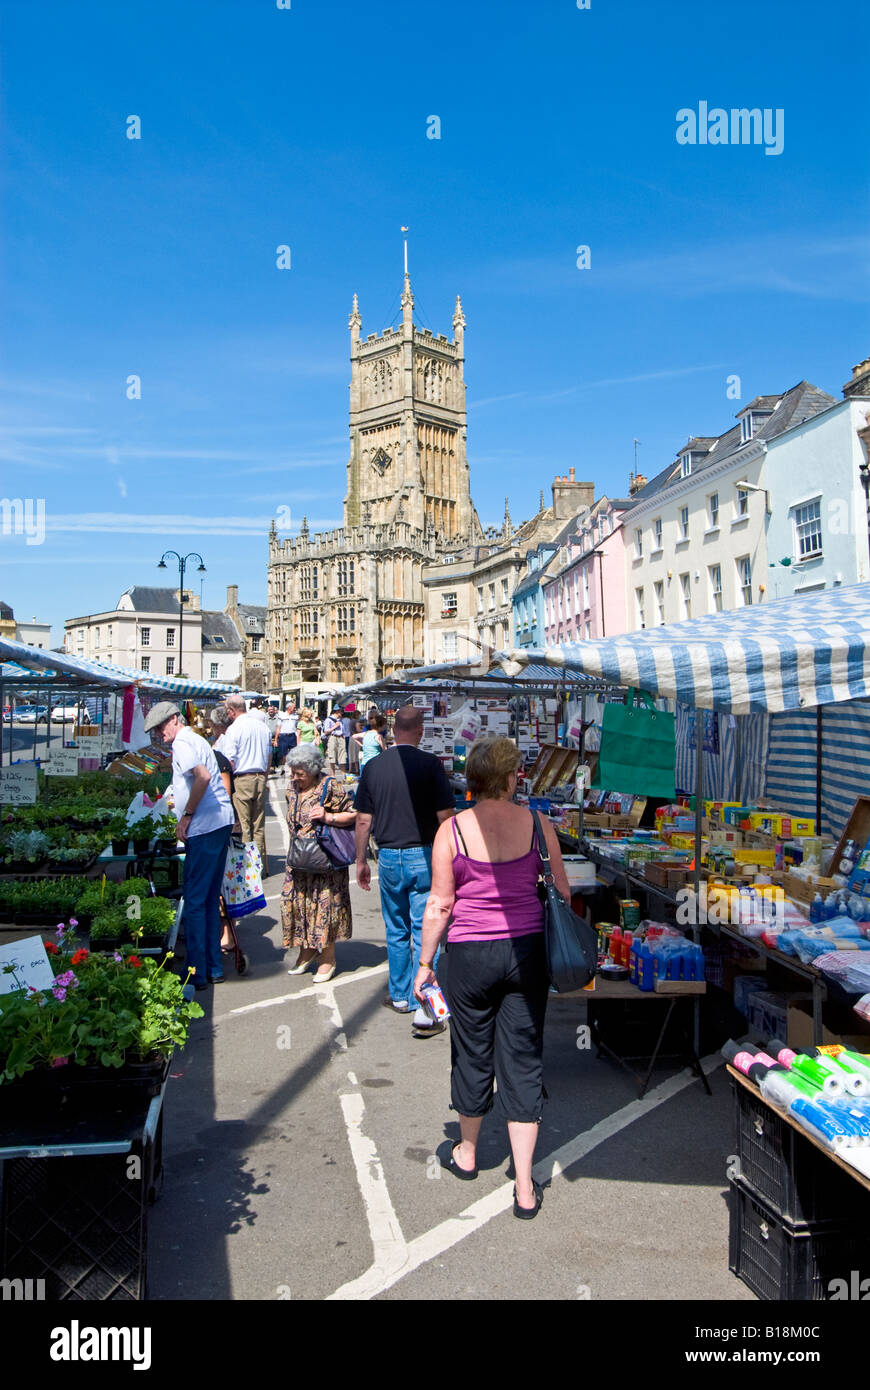 Market day in Cirencester, Gloucestershire, England Stock Photo